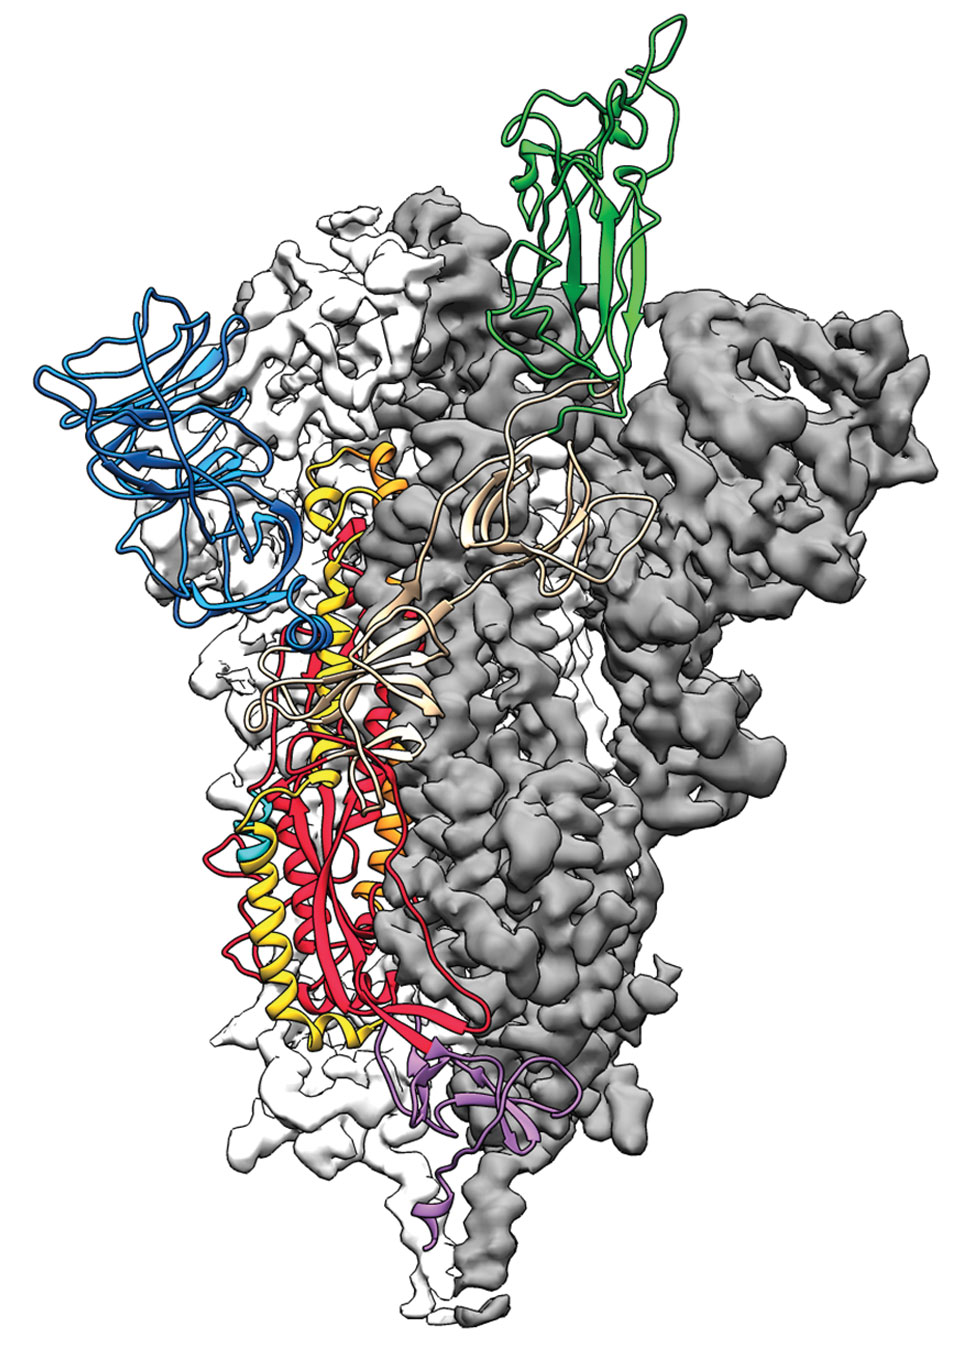 The SARS-CoV-2 spike protein was one of the first coronavirus structures to be solved.